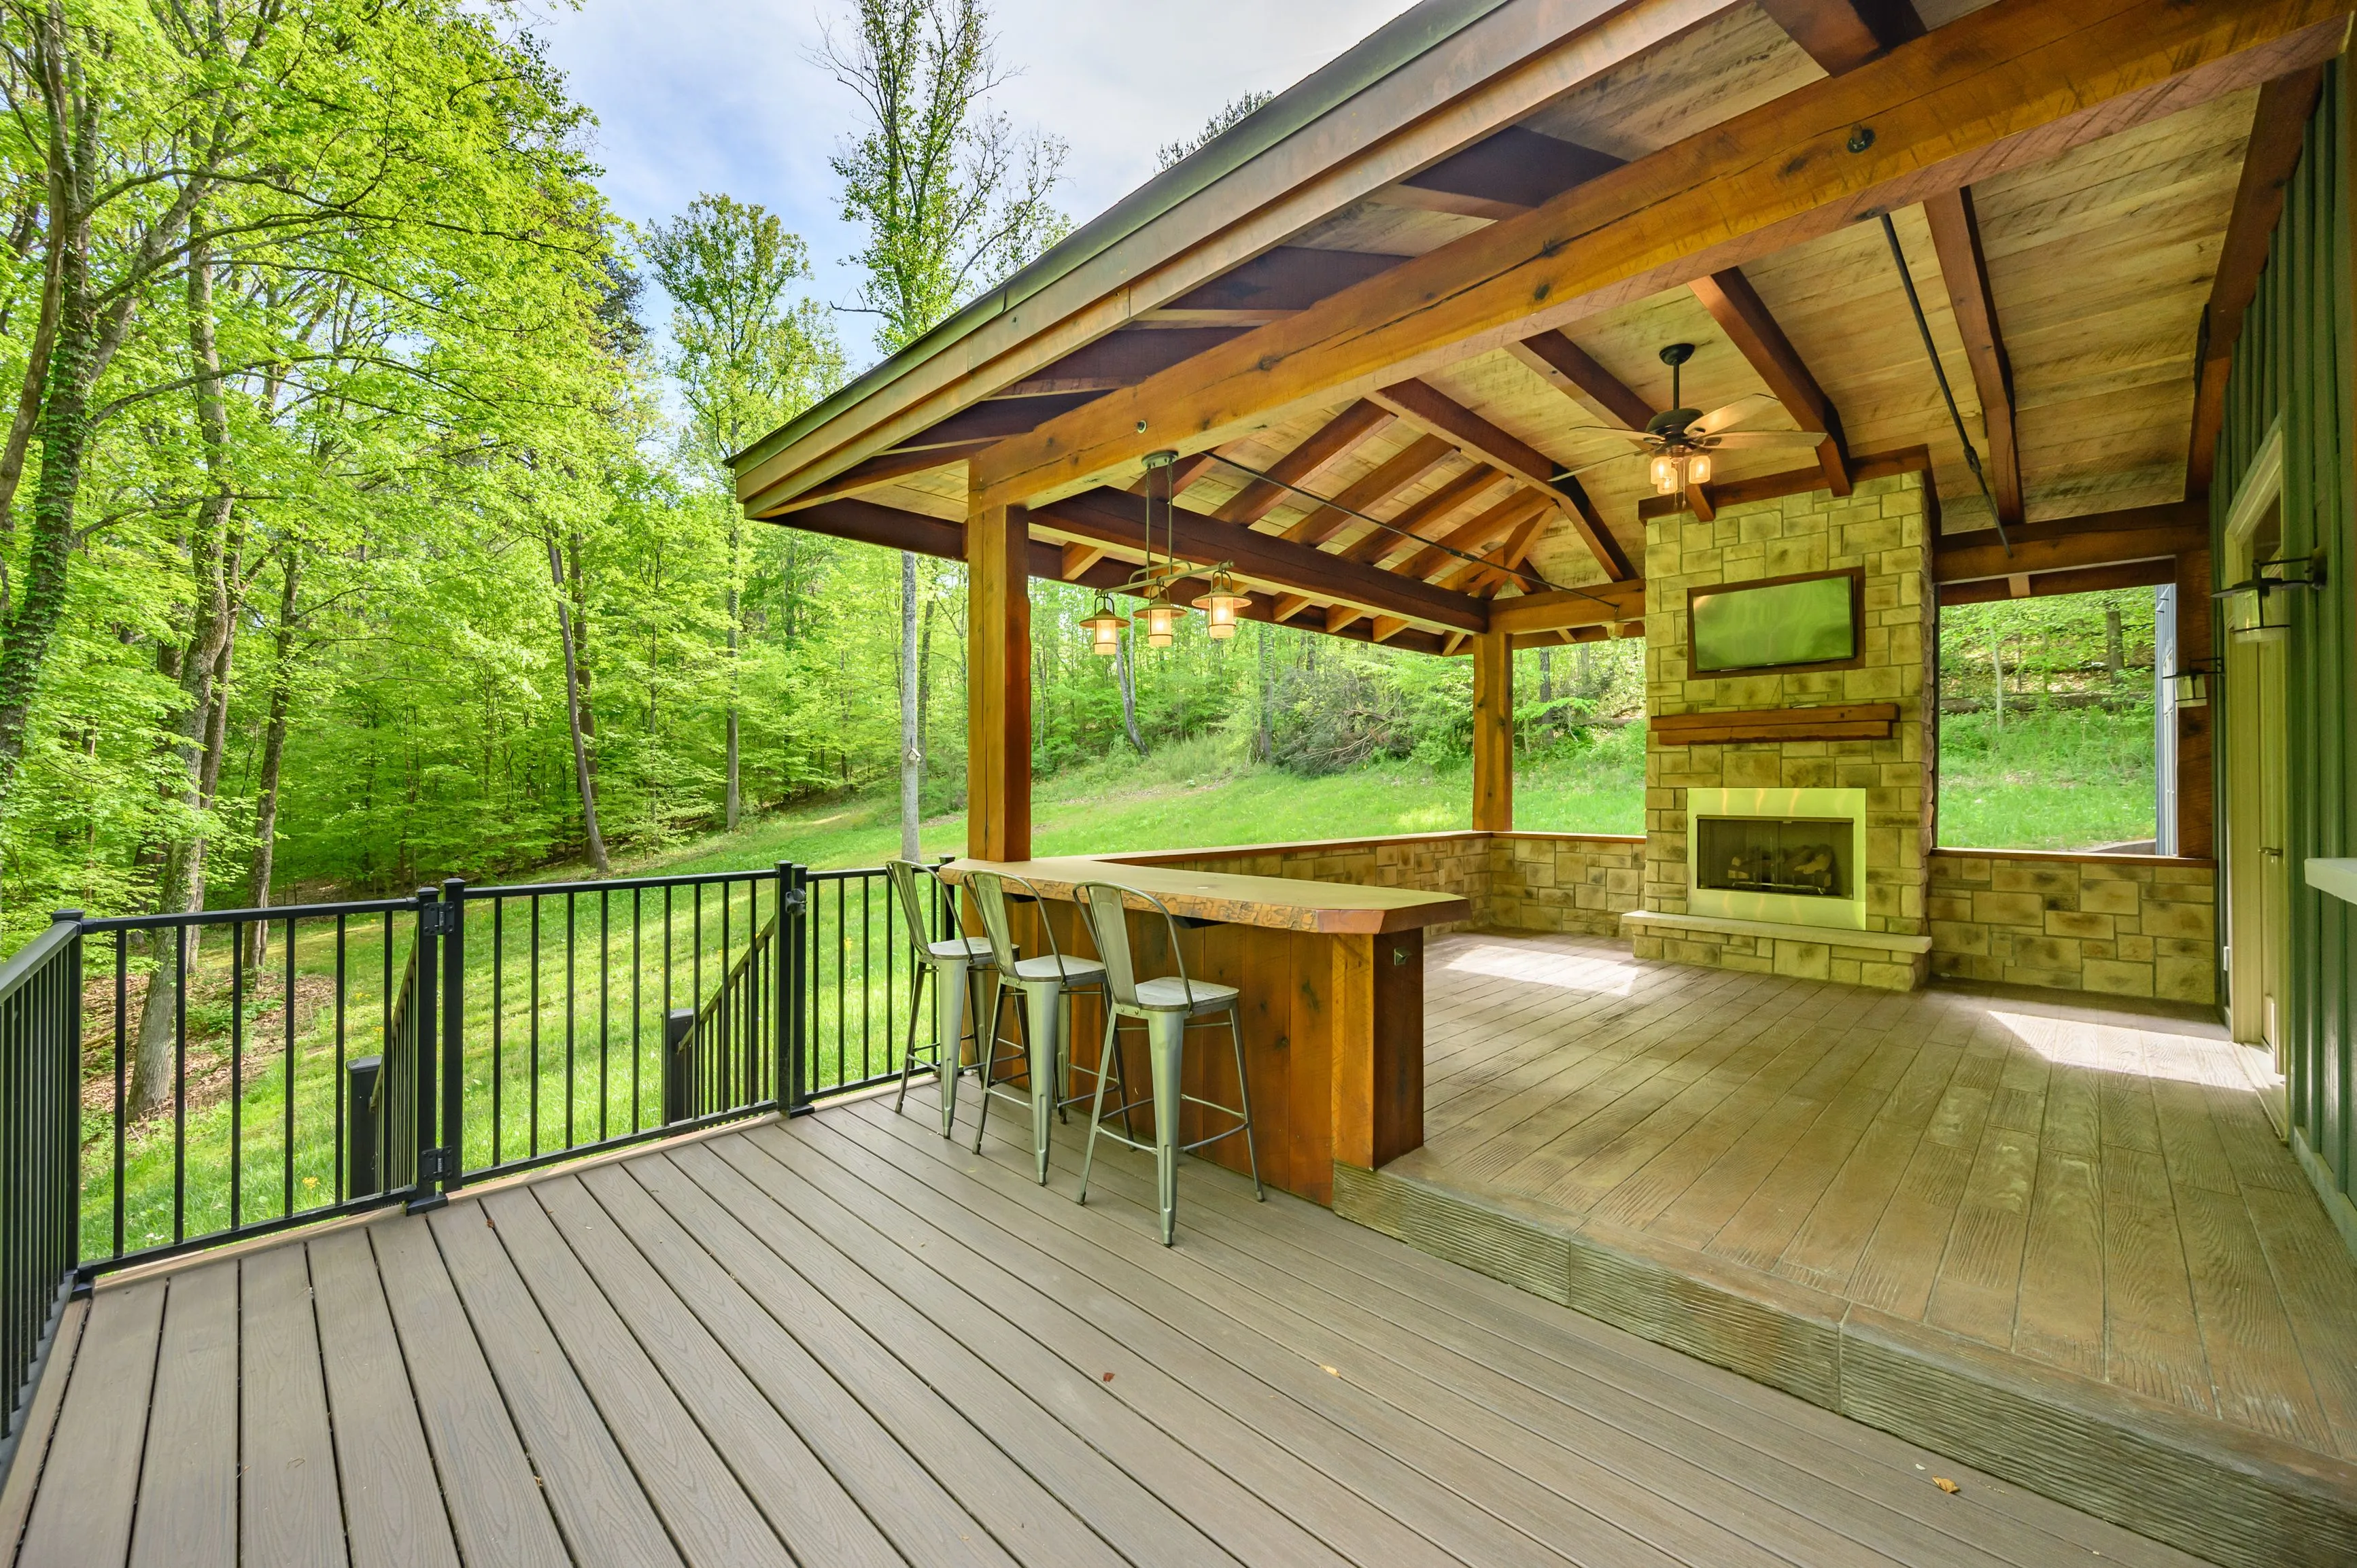 Spacious covered outdoor patio with a wooden bar, stools, fireplace, and a view of lush greenery.